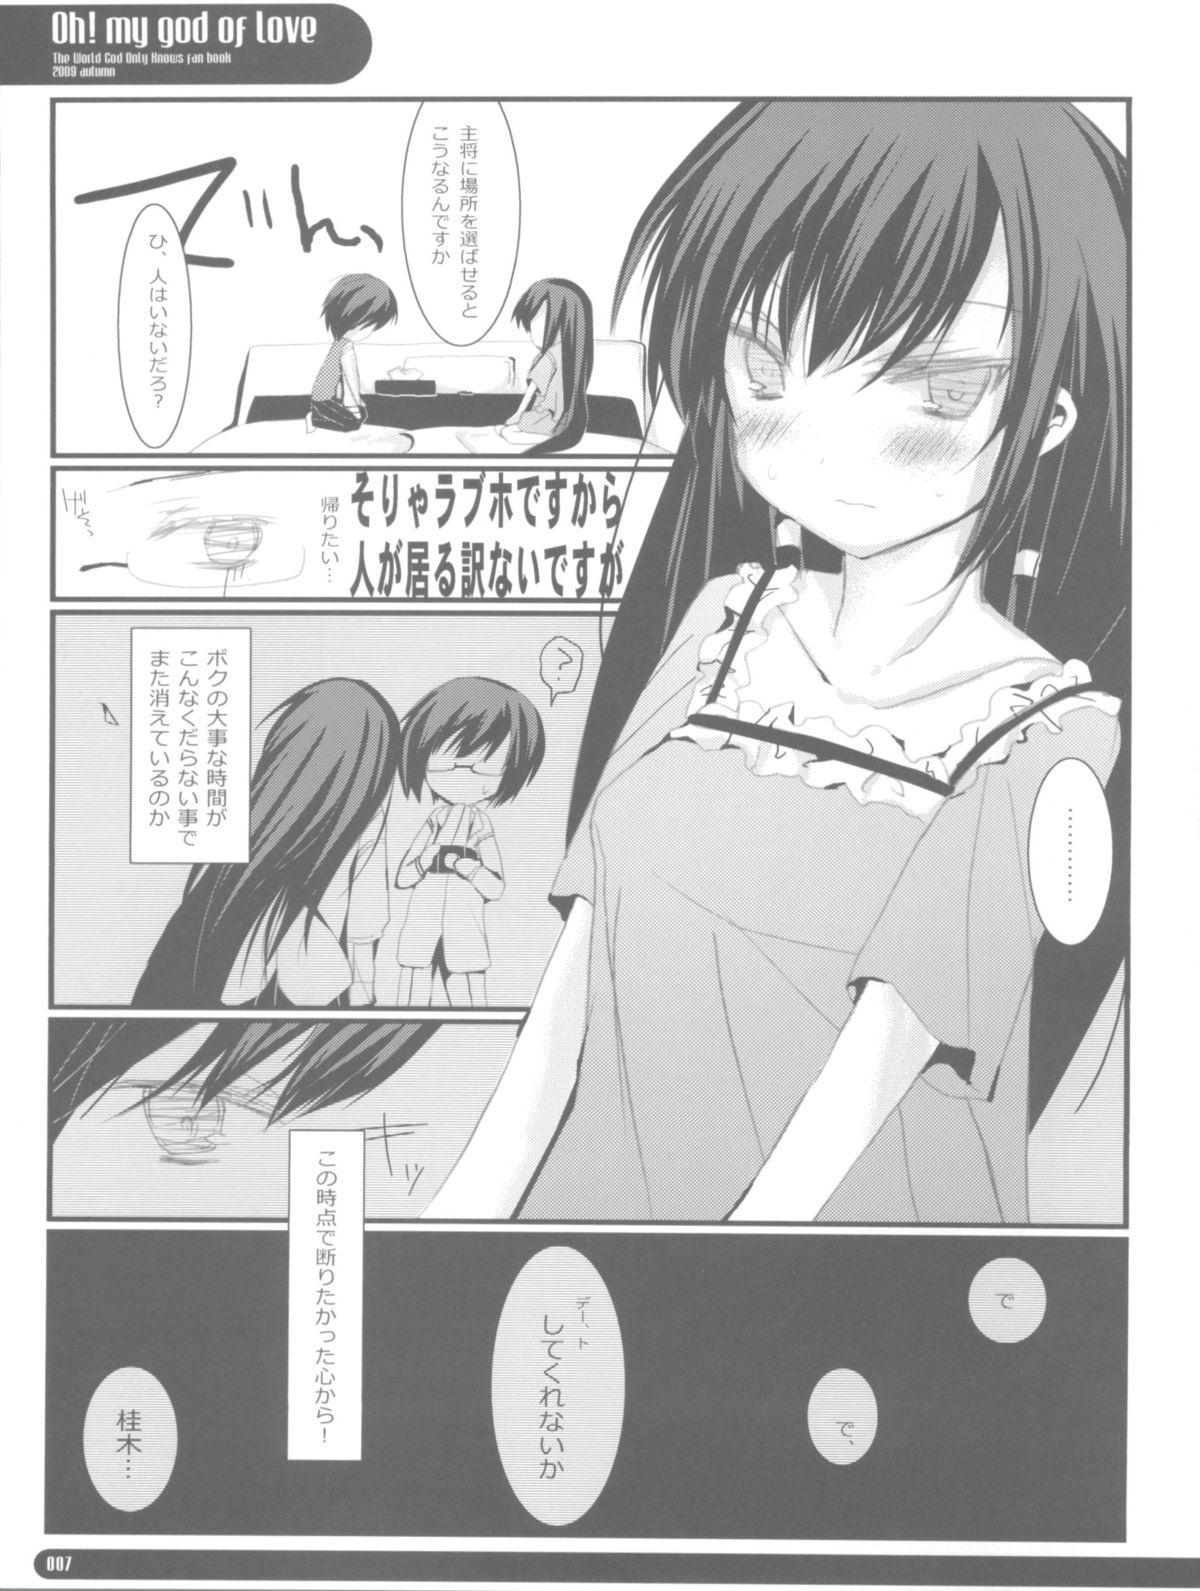 Thick OH!MY GOD OF LOVE - The world god only knows Ball Busting - Page 7